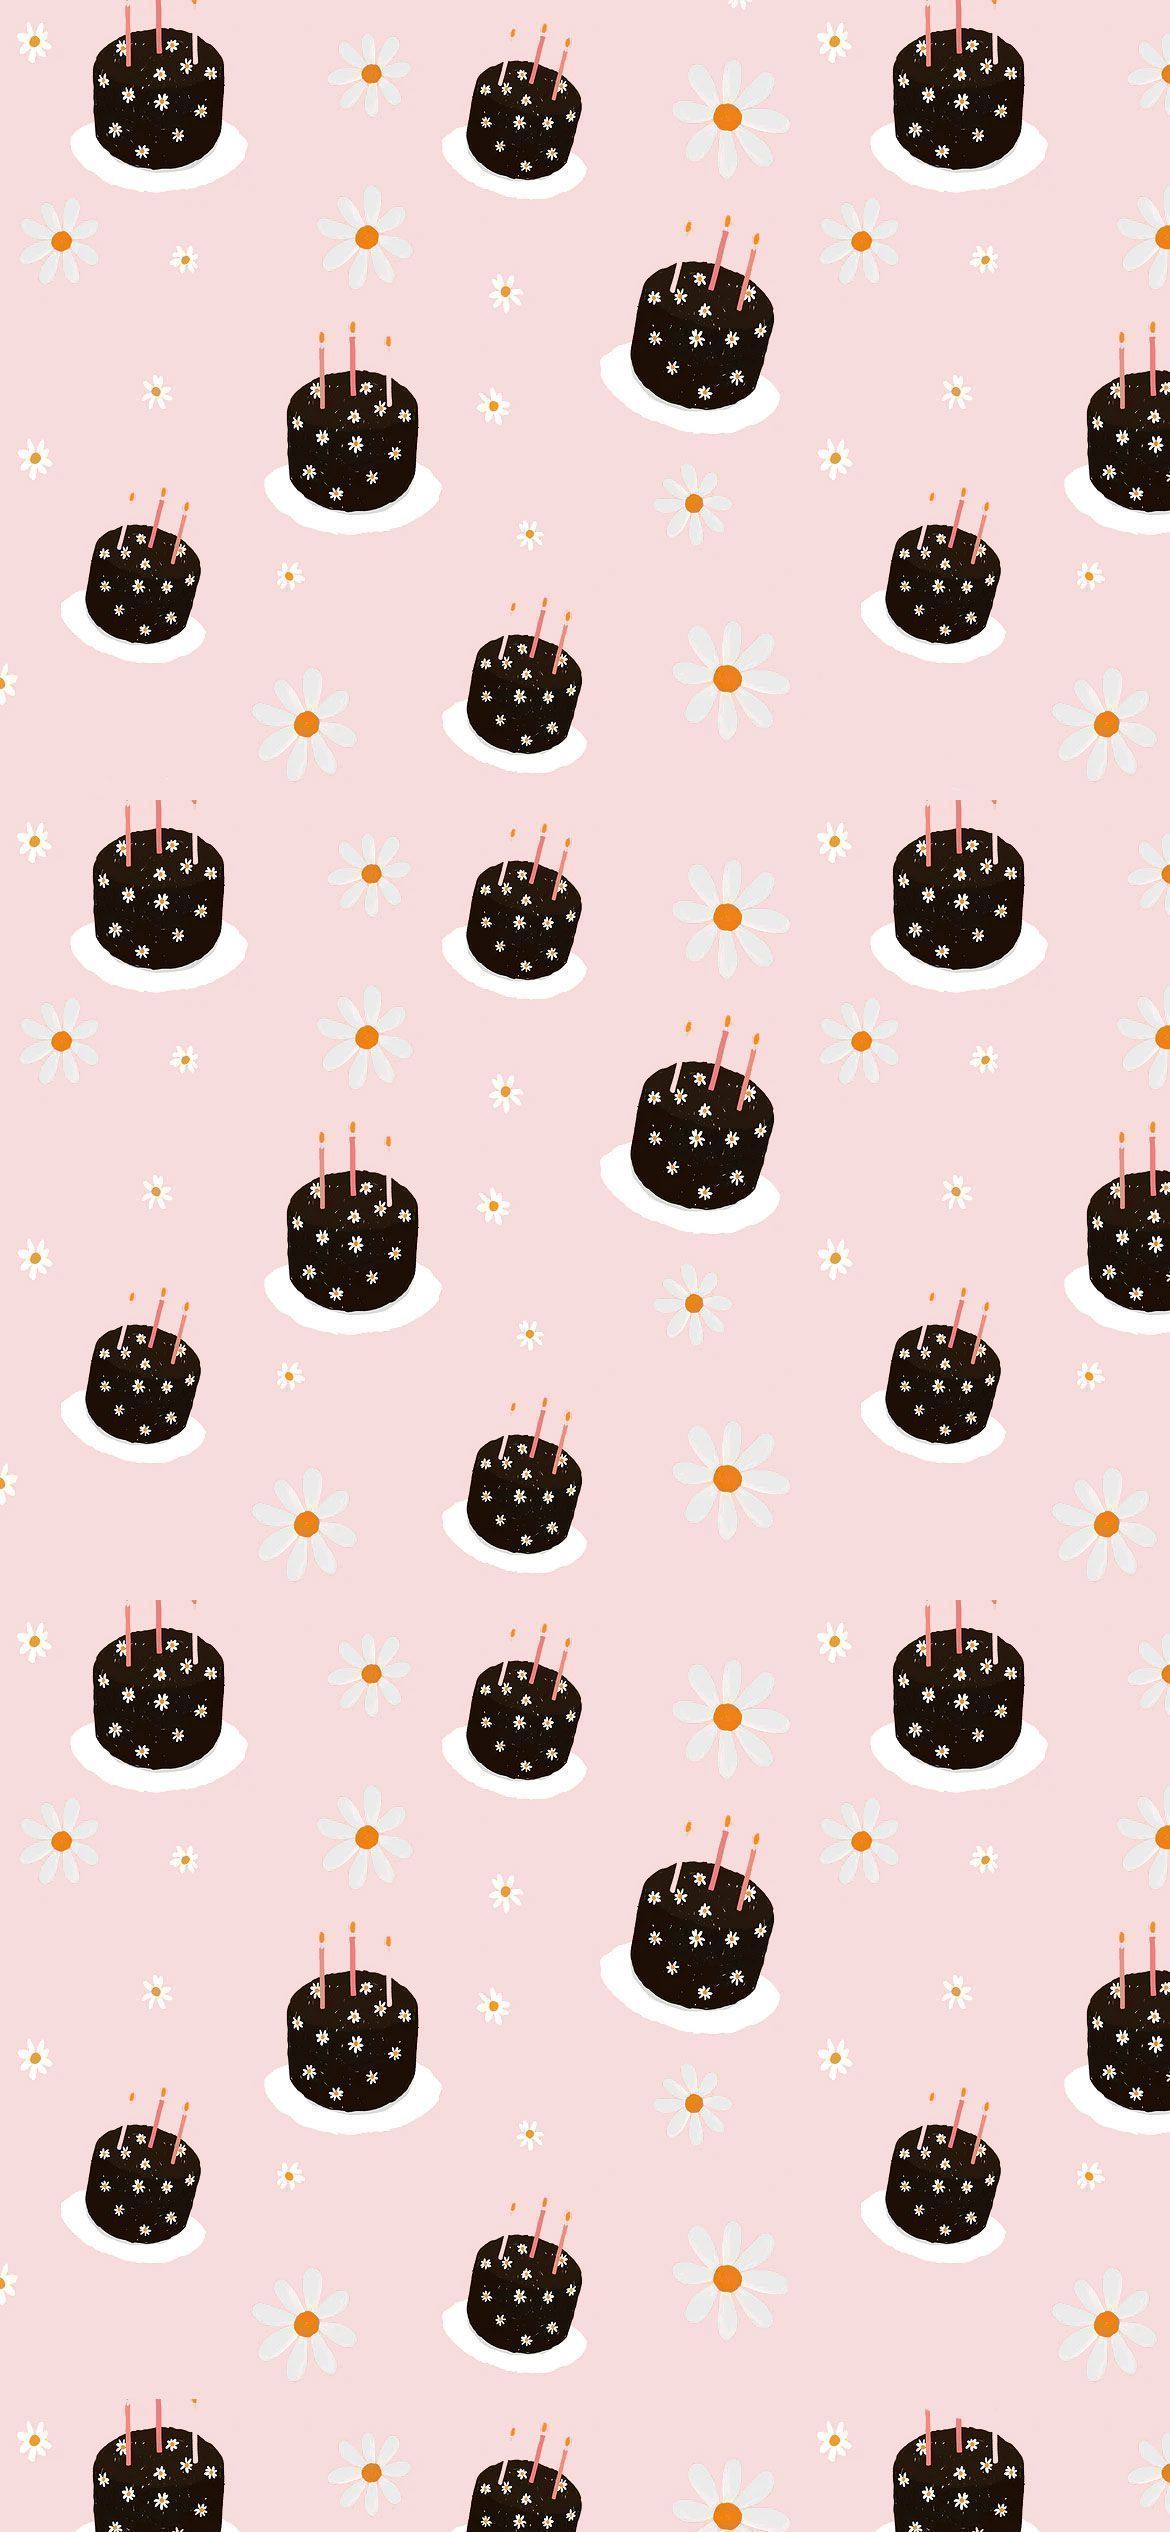 A pink birthday cake phone wallpaper with daisies - Barbie, hot pink, cute, chocolate, birthday, cake